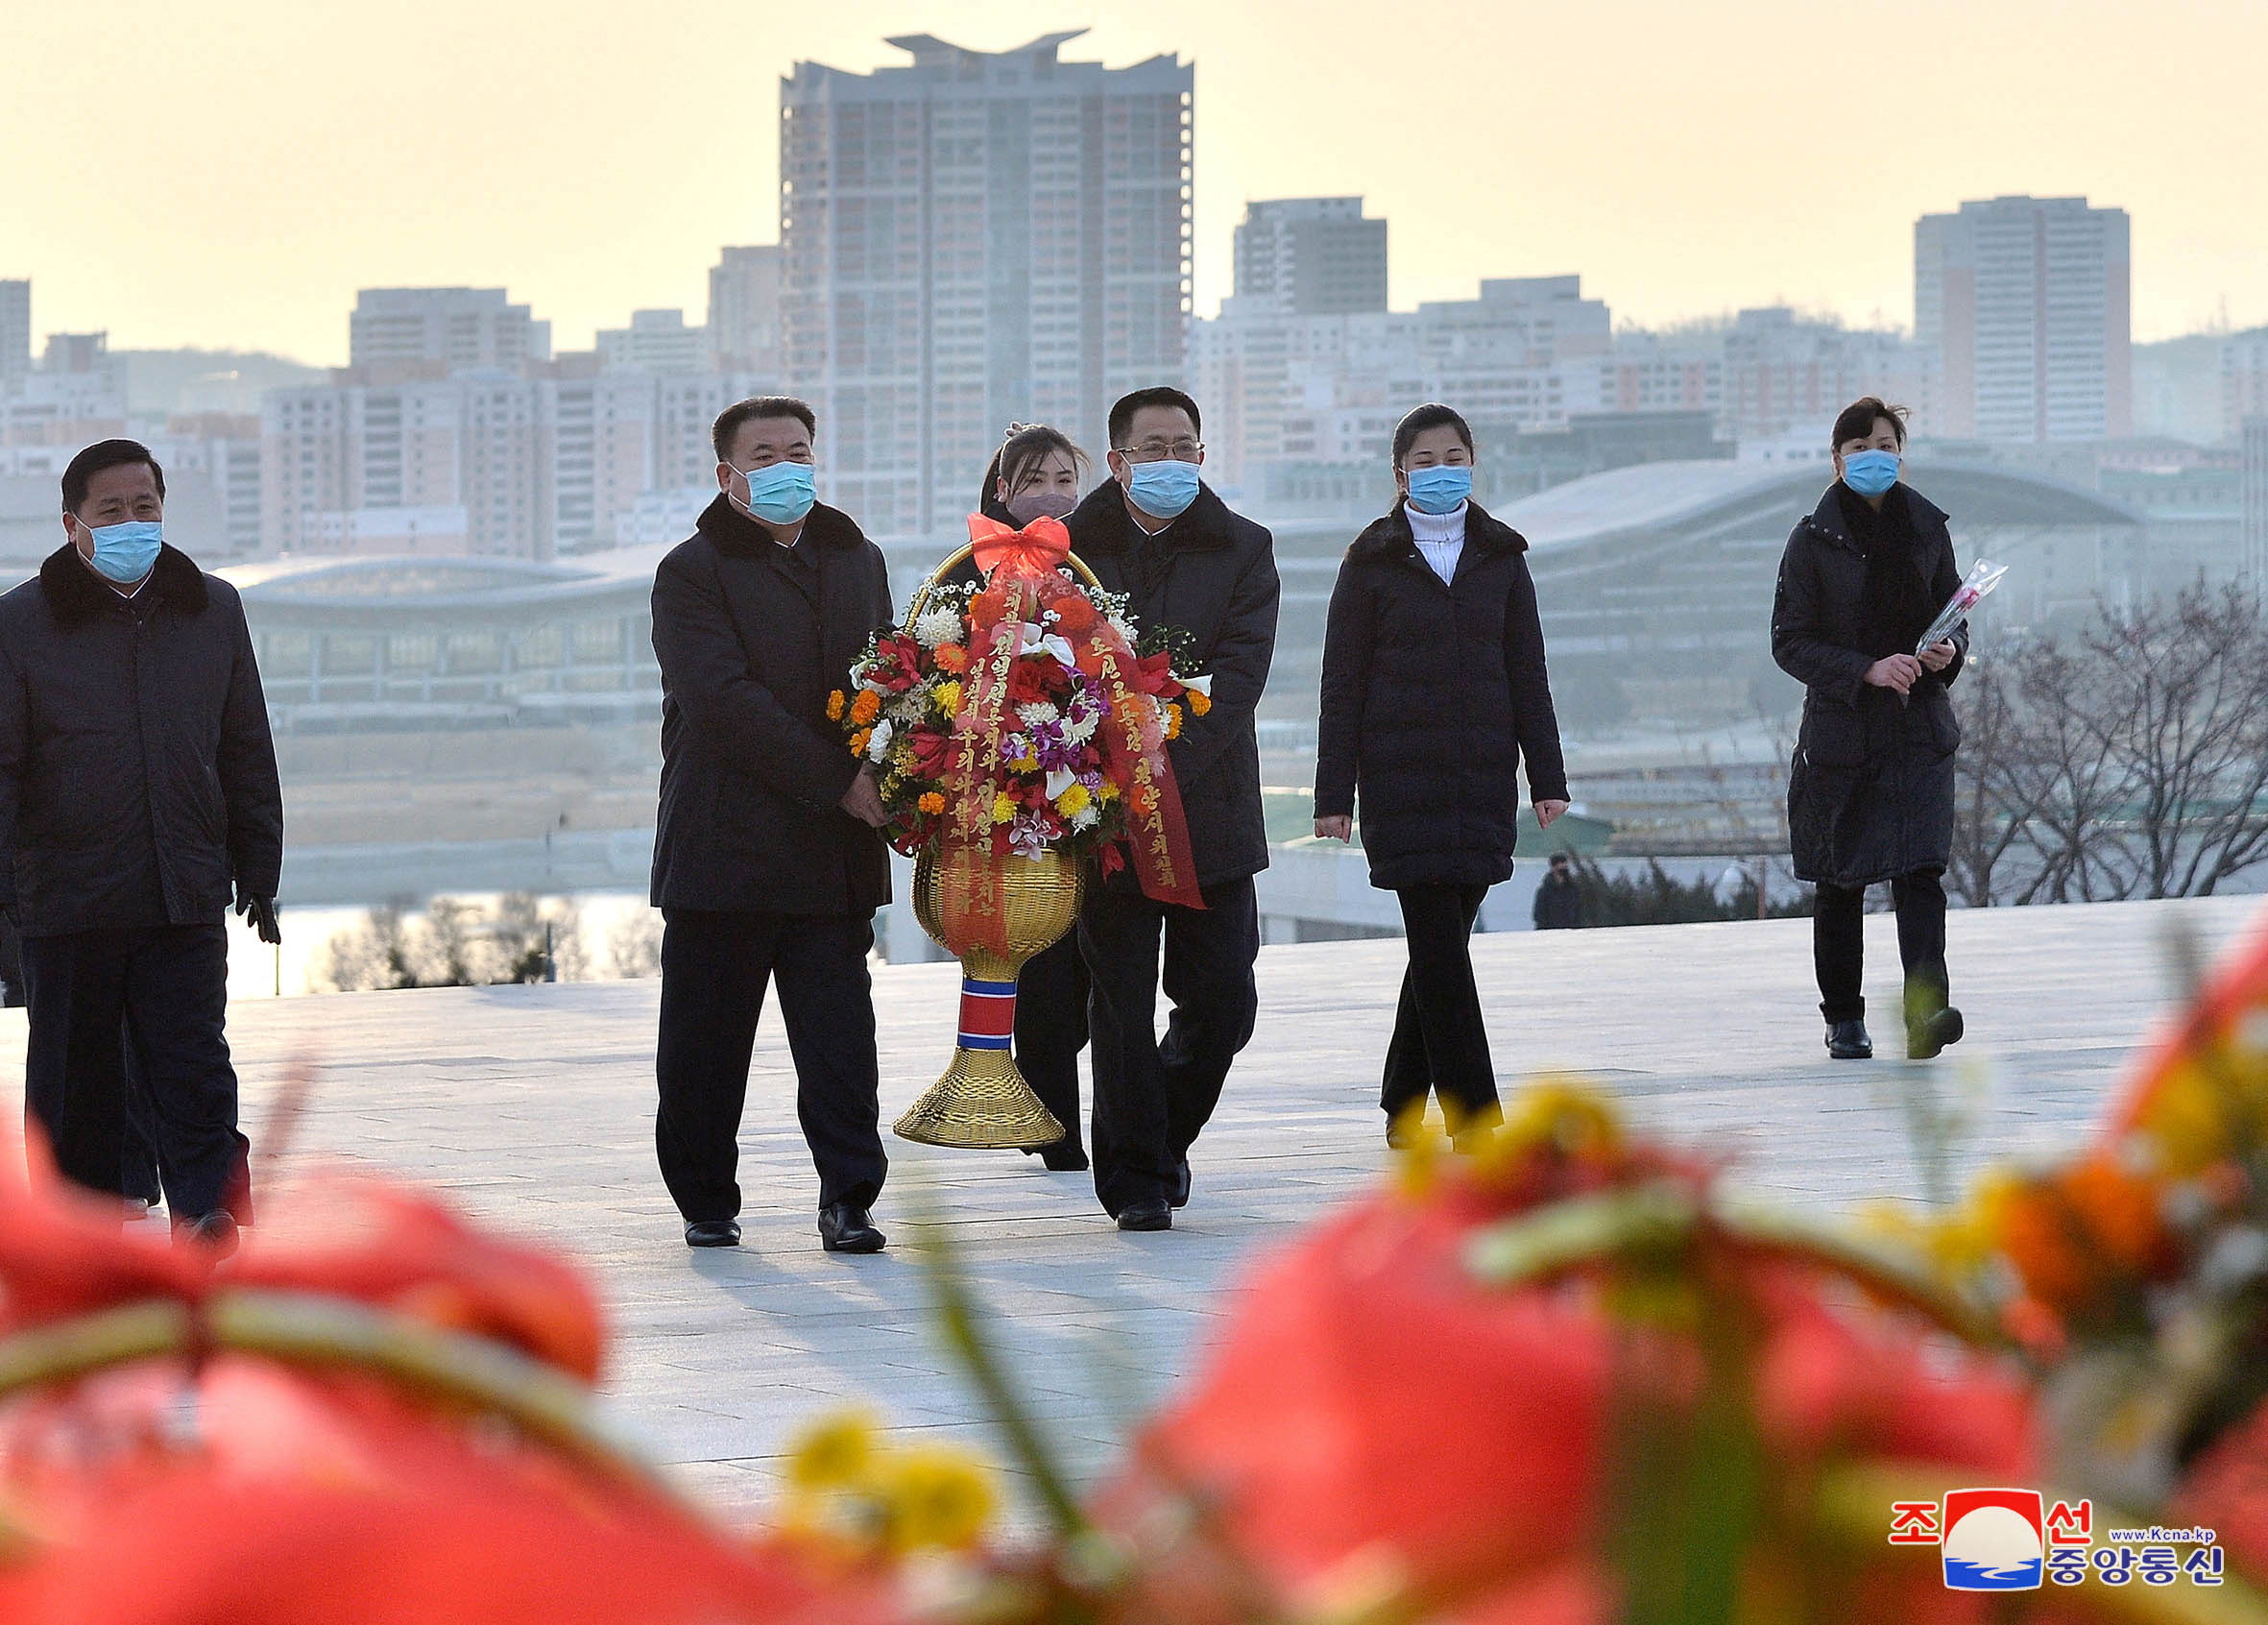 People lay floral tribute to commemorate the Day of the Shining Star, the birth anniversary of the late leader Kim Jong Il, at the Mansudae Grand Monument in Pyongyang